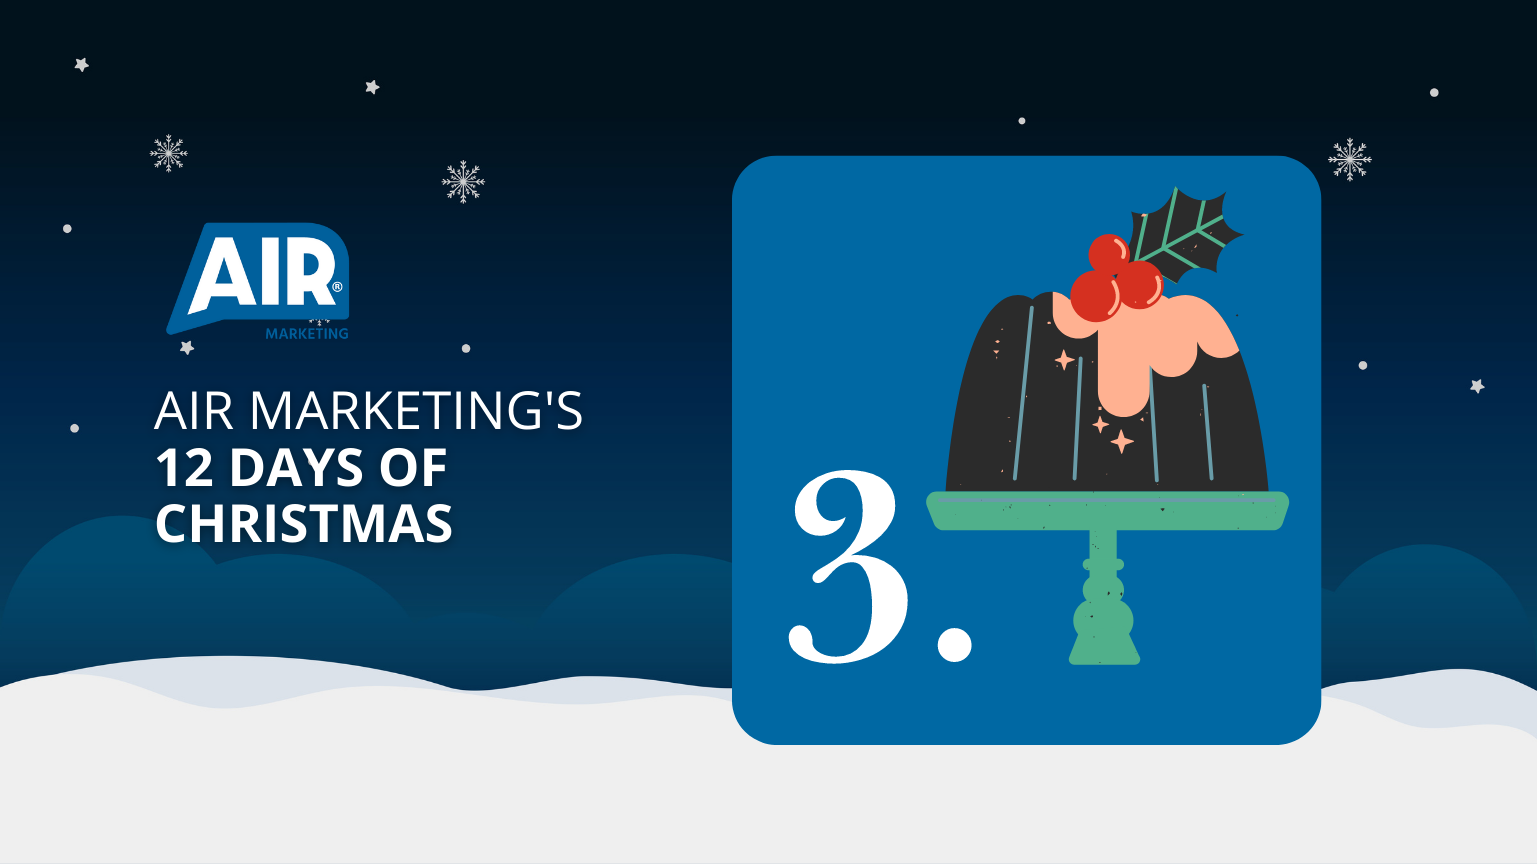 Day 3 of Air Marketing’s 12 Days of Christmas: Best Christmas Adverts Of All Time